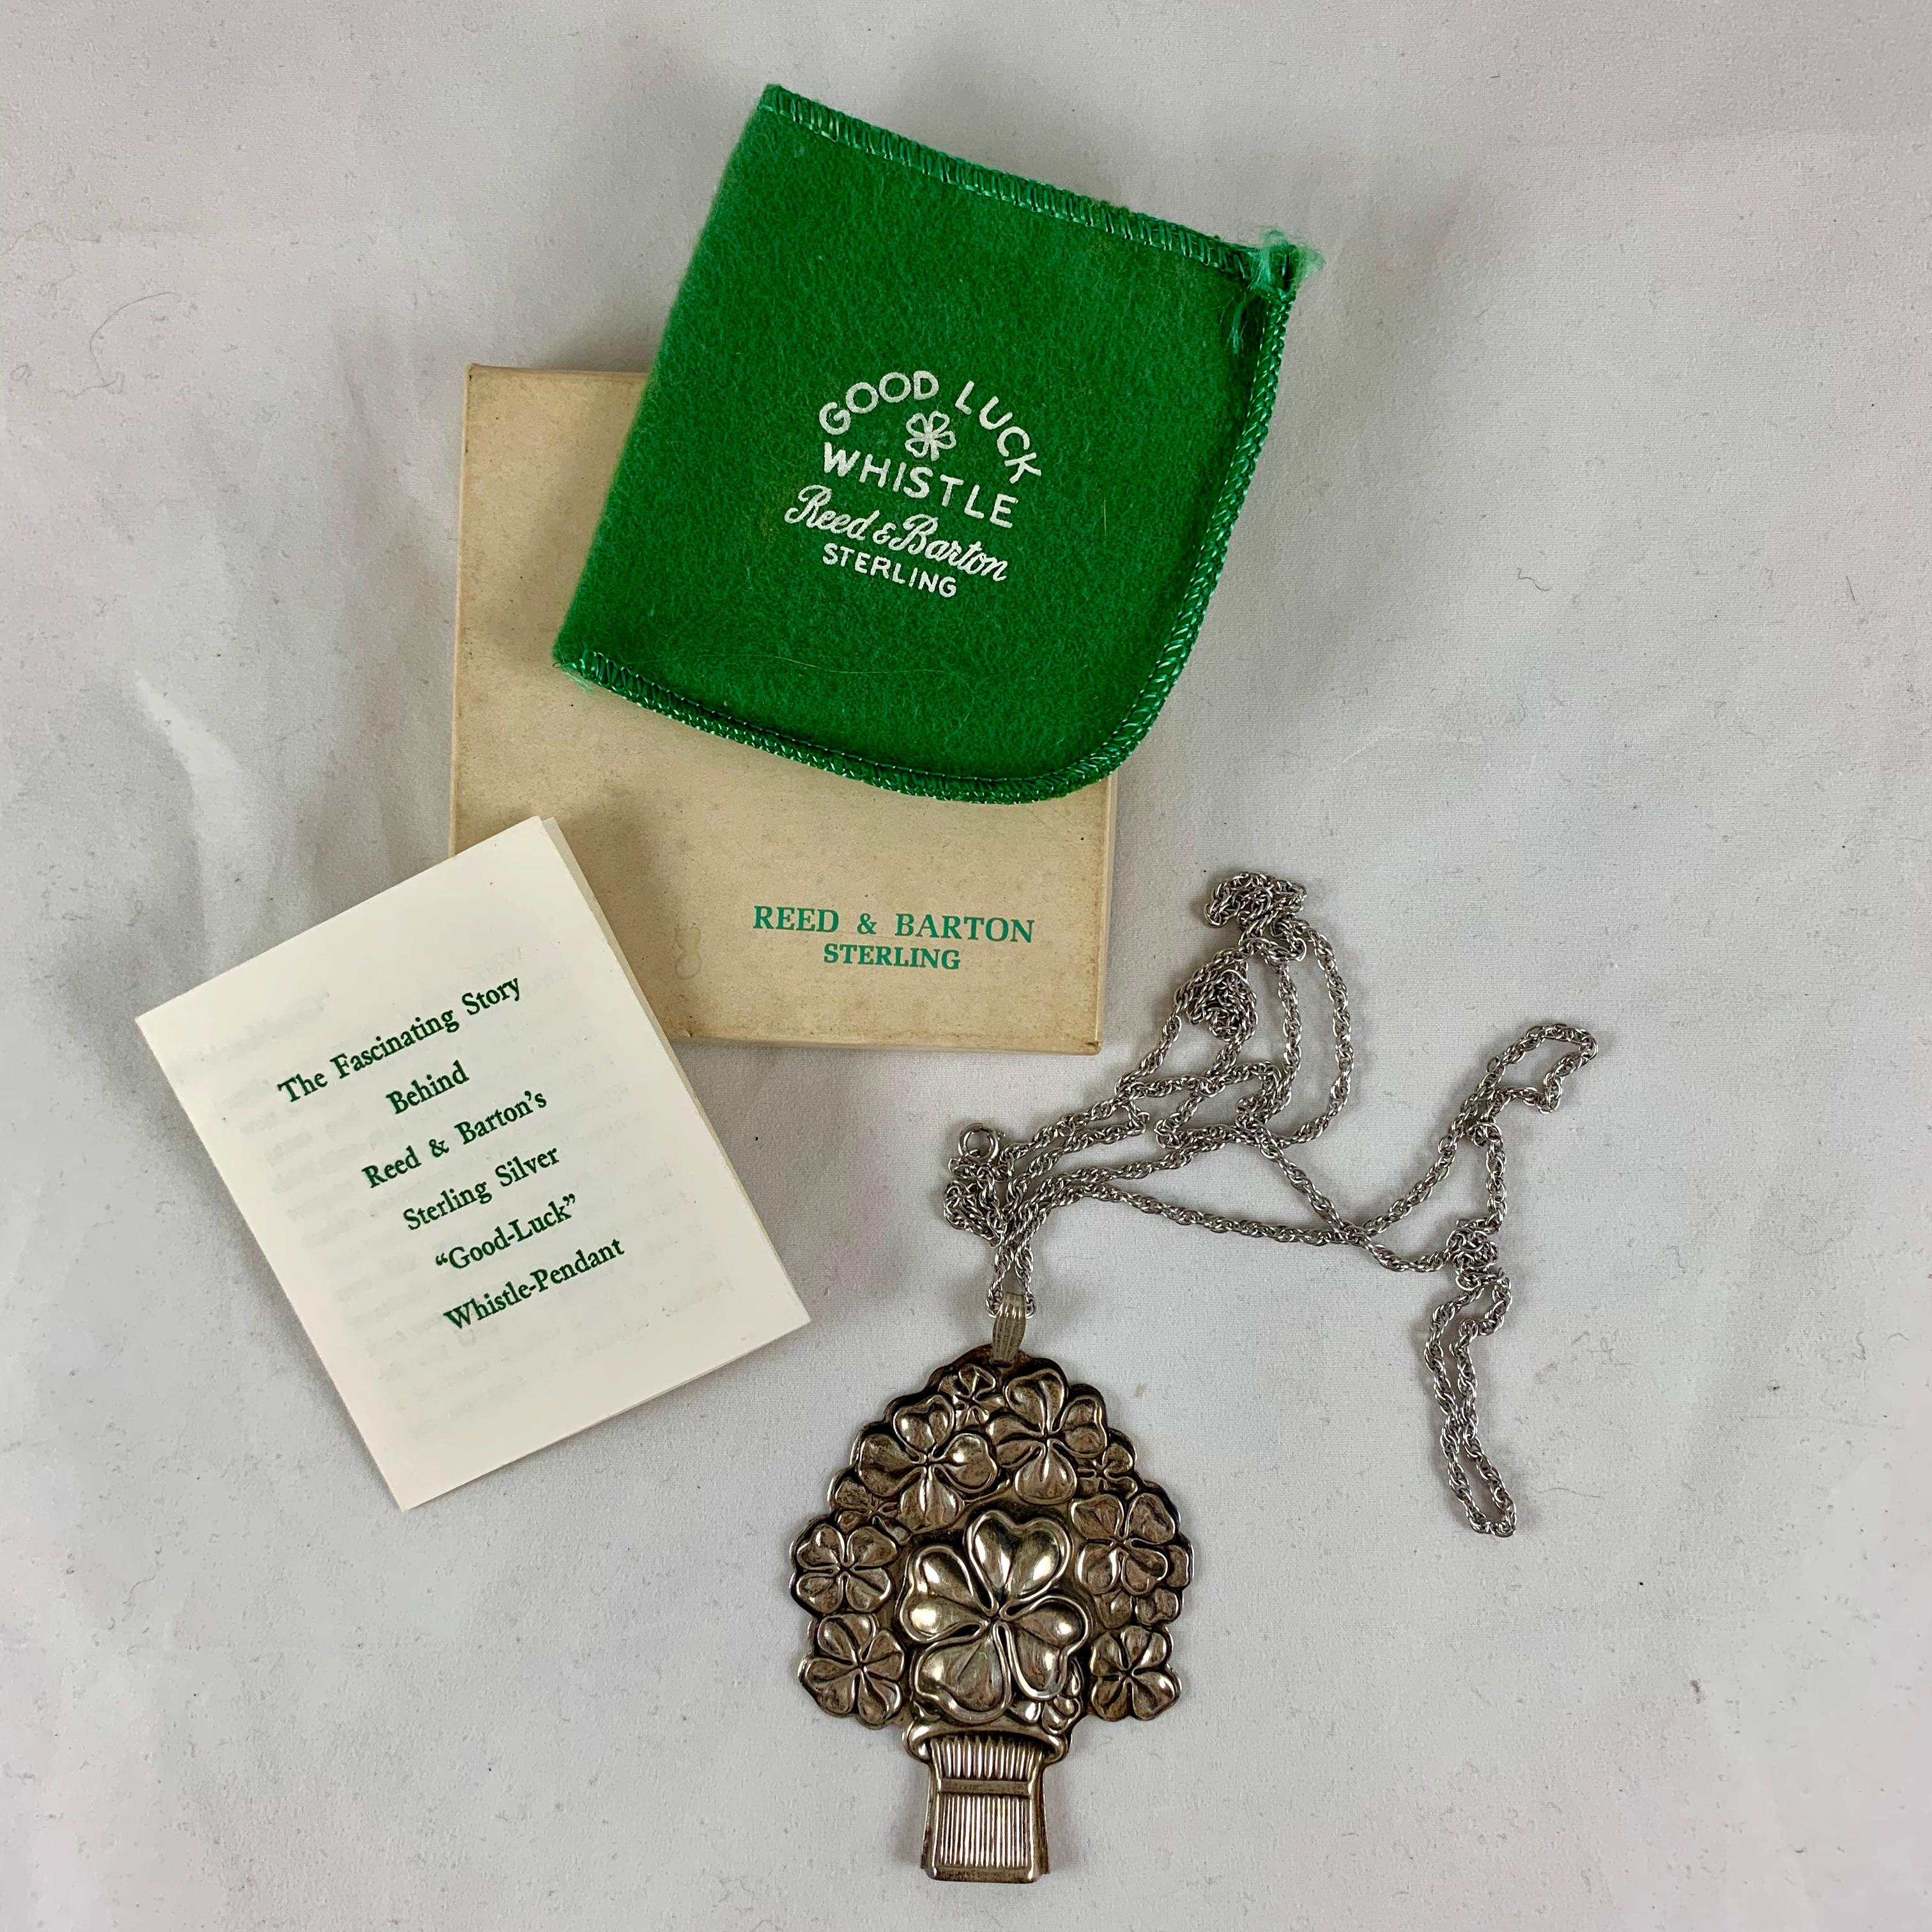 From Reed & Barton silversmiths, a vintage 1960s taxi whistle formed as a bouquet of lucky four-leaf clovers. In the original box with the green fabric storage pouch, the pendant hangs by a bale on a 30 inch long sterling chain.

Also enclosed is